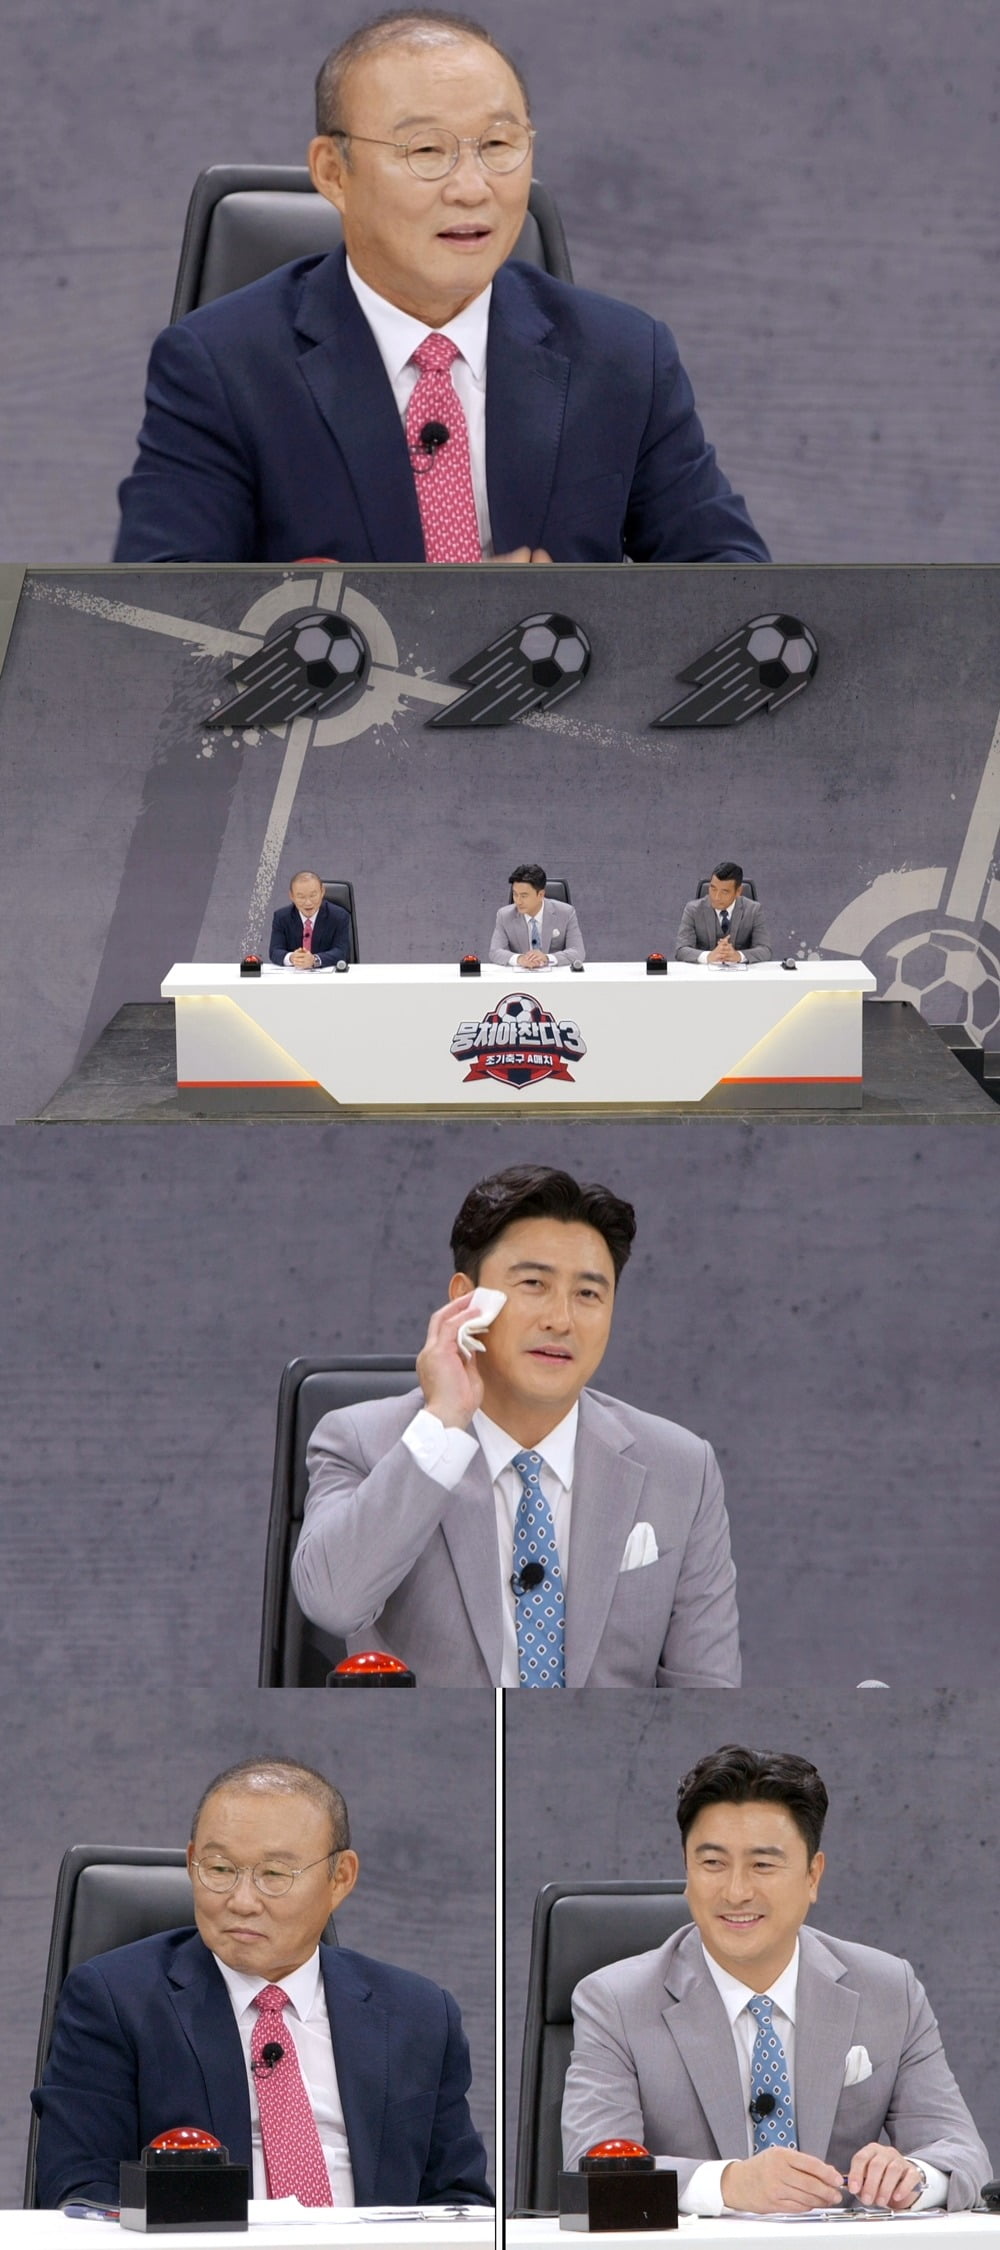 Ahn Jung-hwan's qualifications as a coach have been questioned